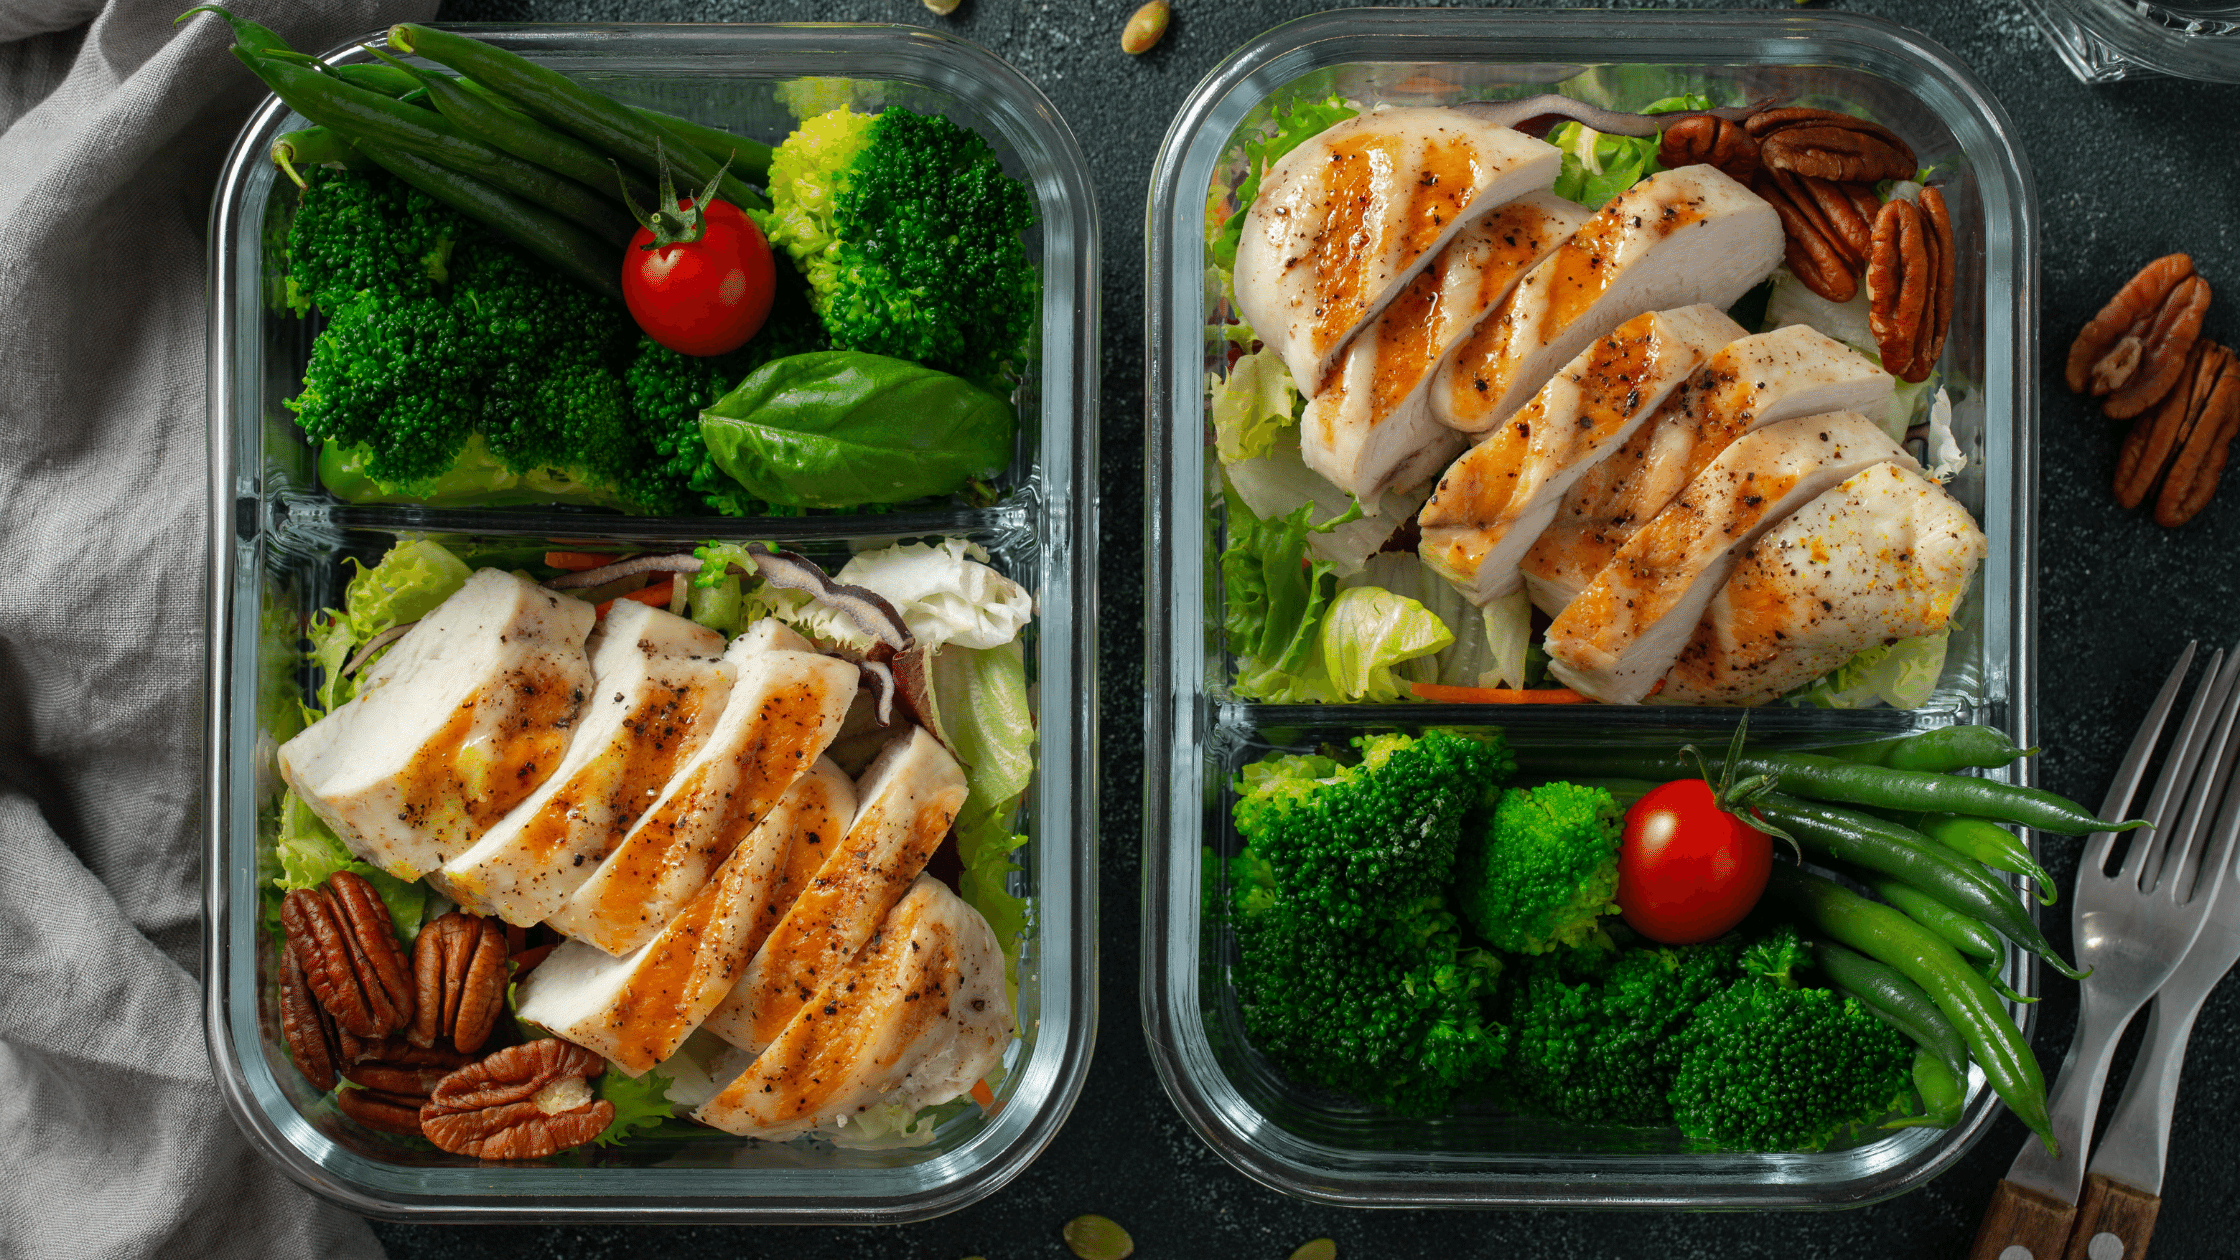 Meal Prep Ideas Don't Try New Foods